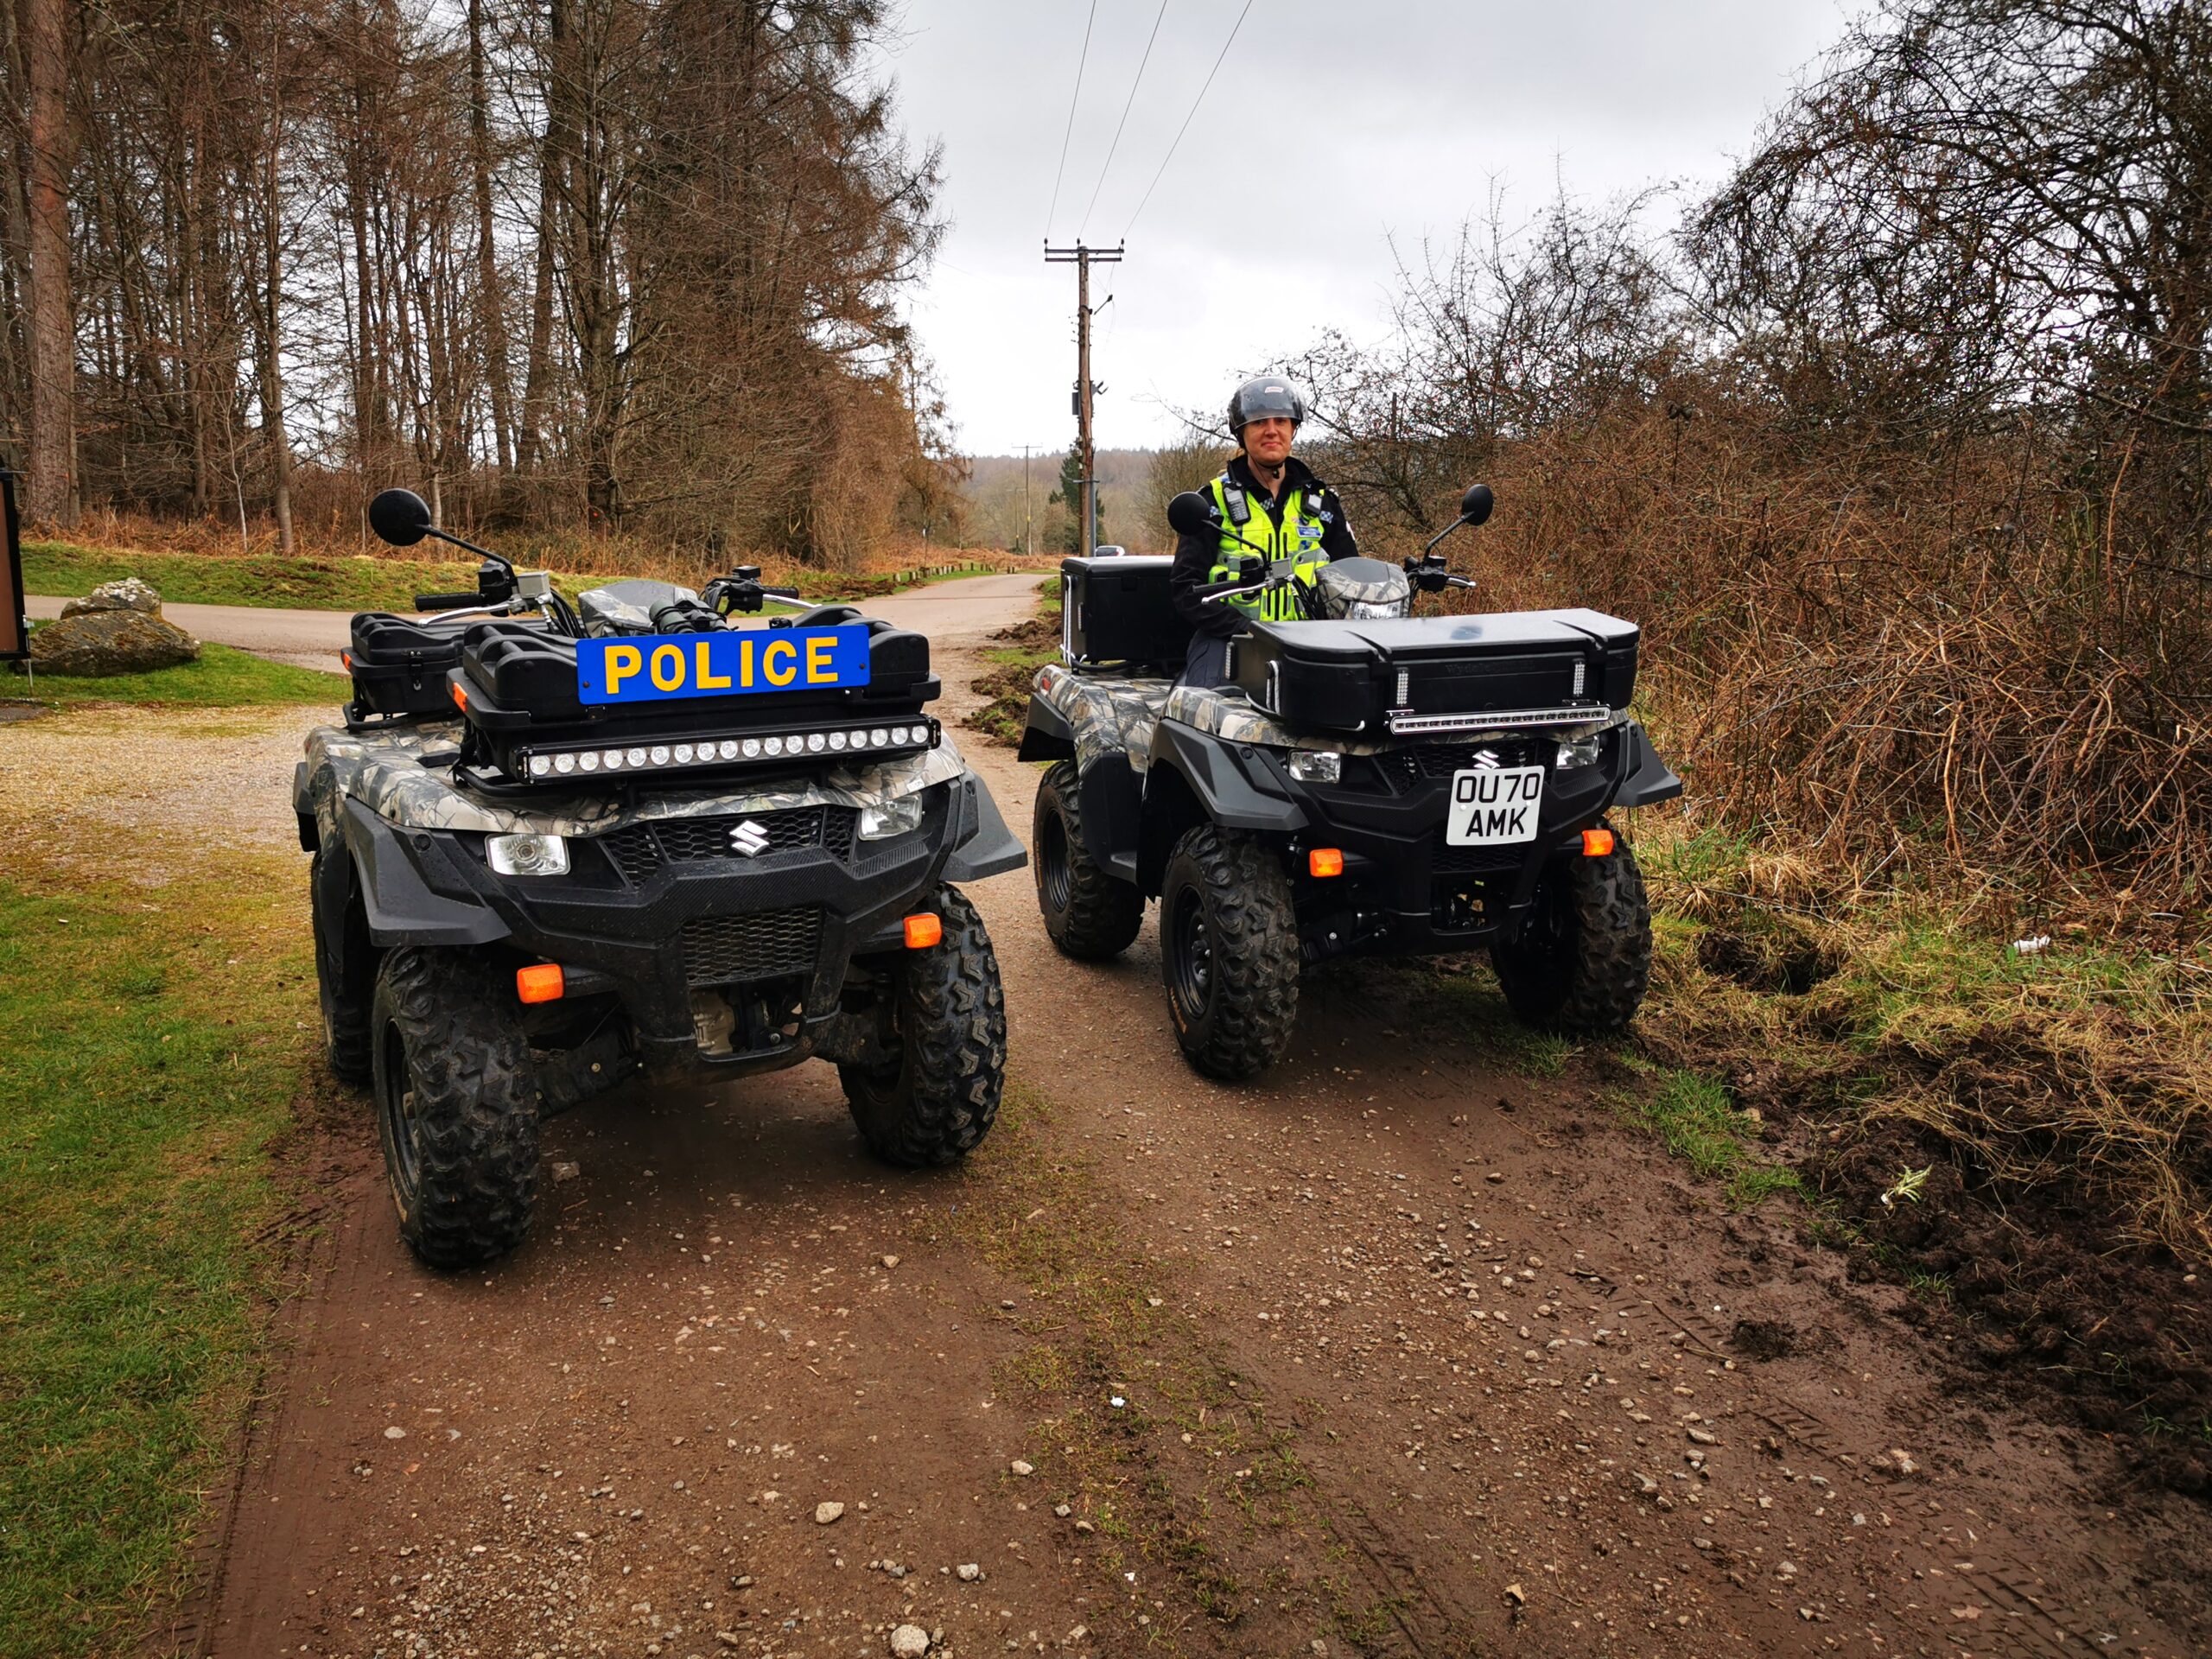 Suzuki and local ATV Dealer join forces to help Gloucestershire Police fight rural crime